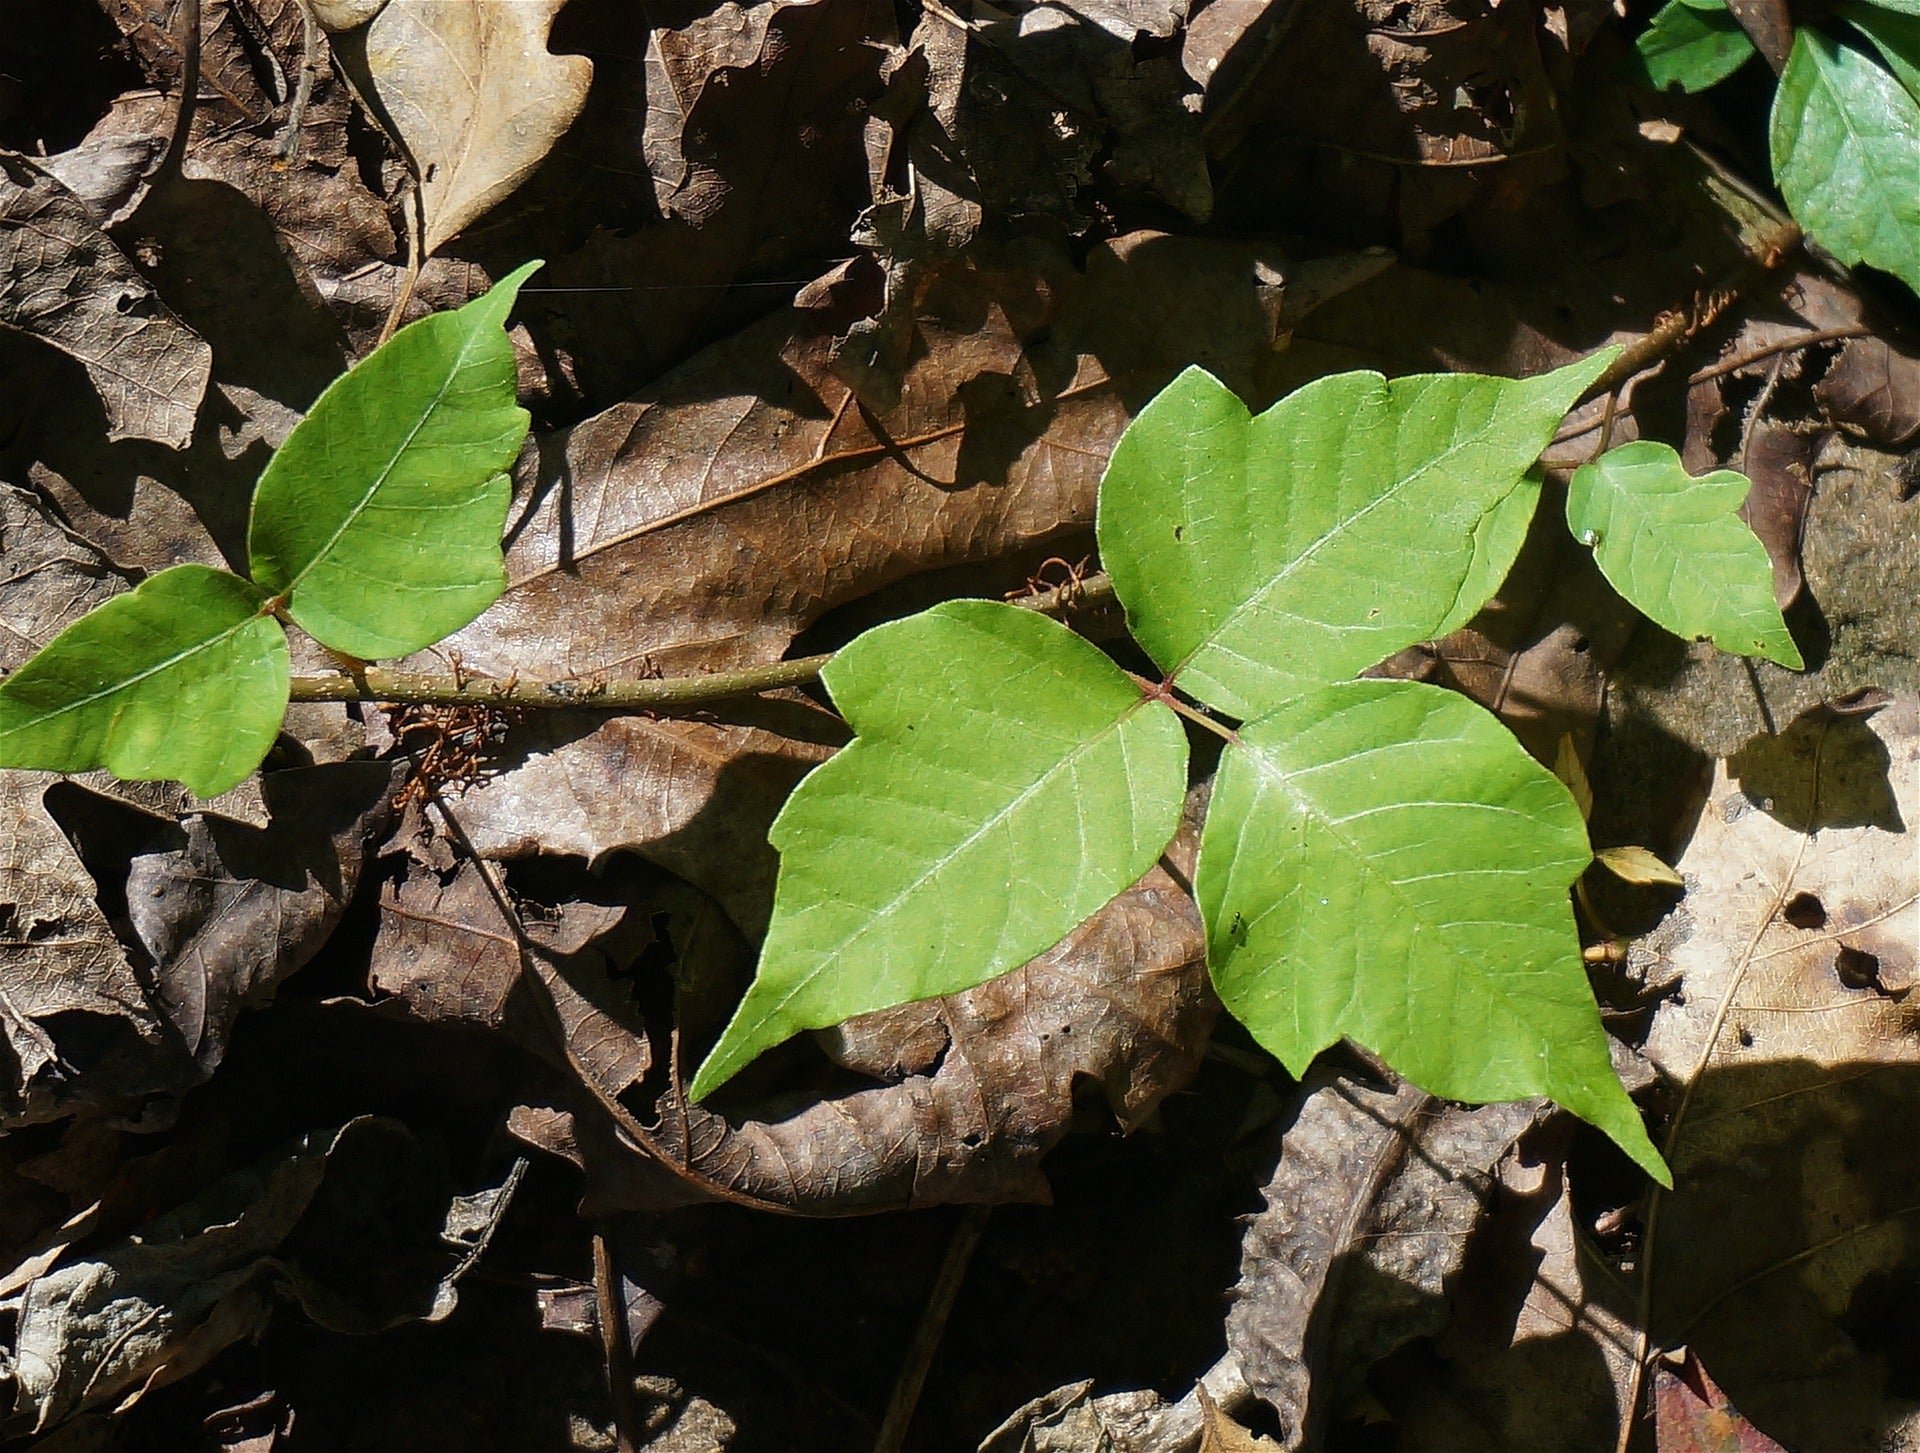 How to Treat Poison Ivy